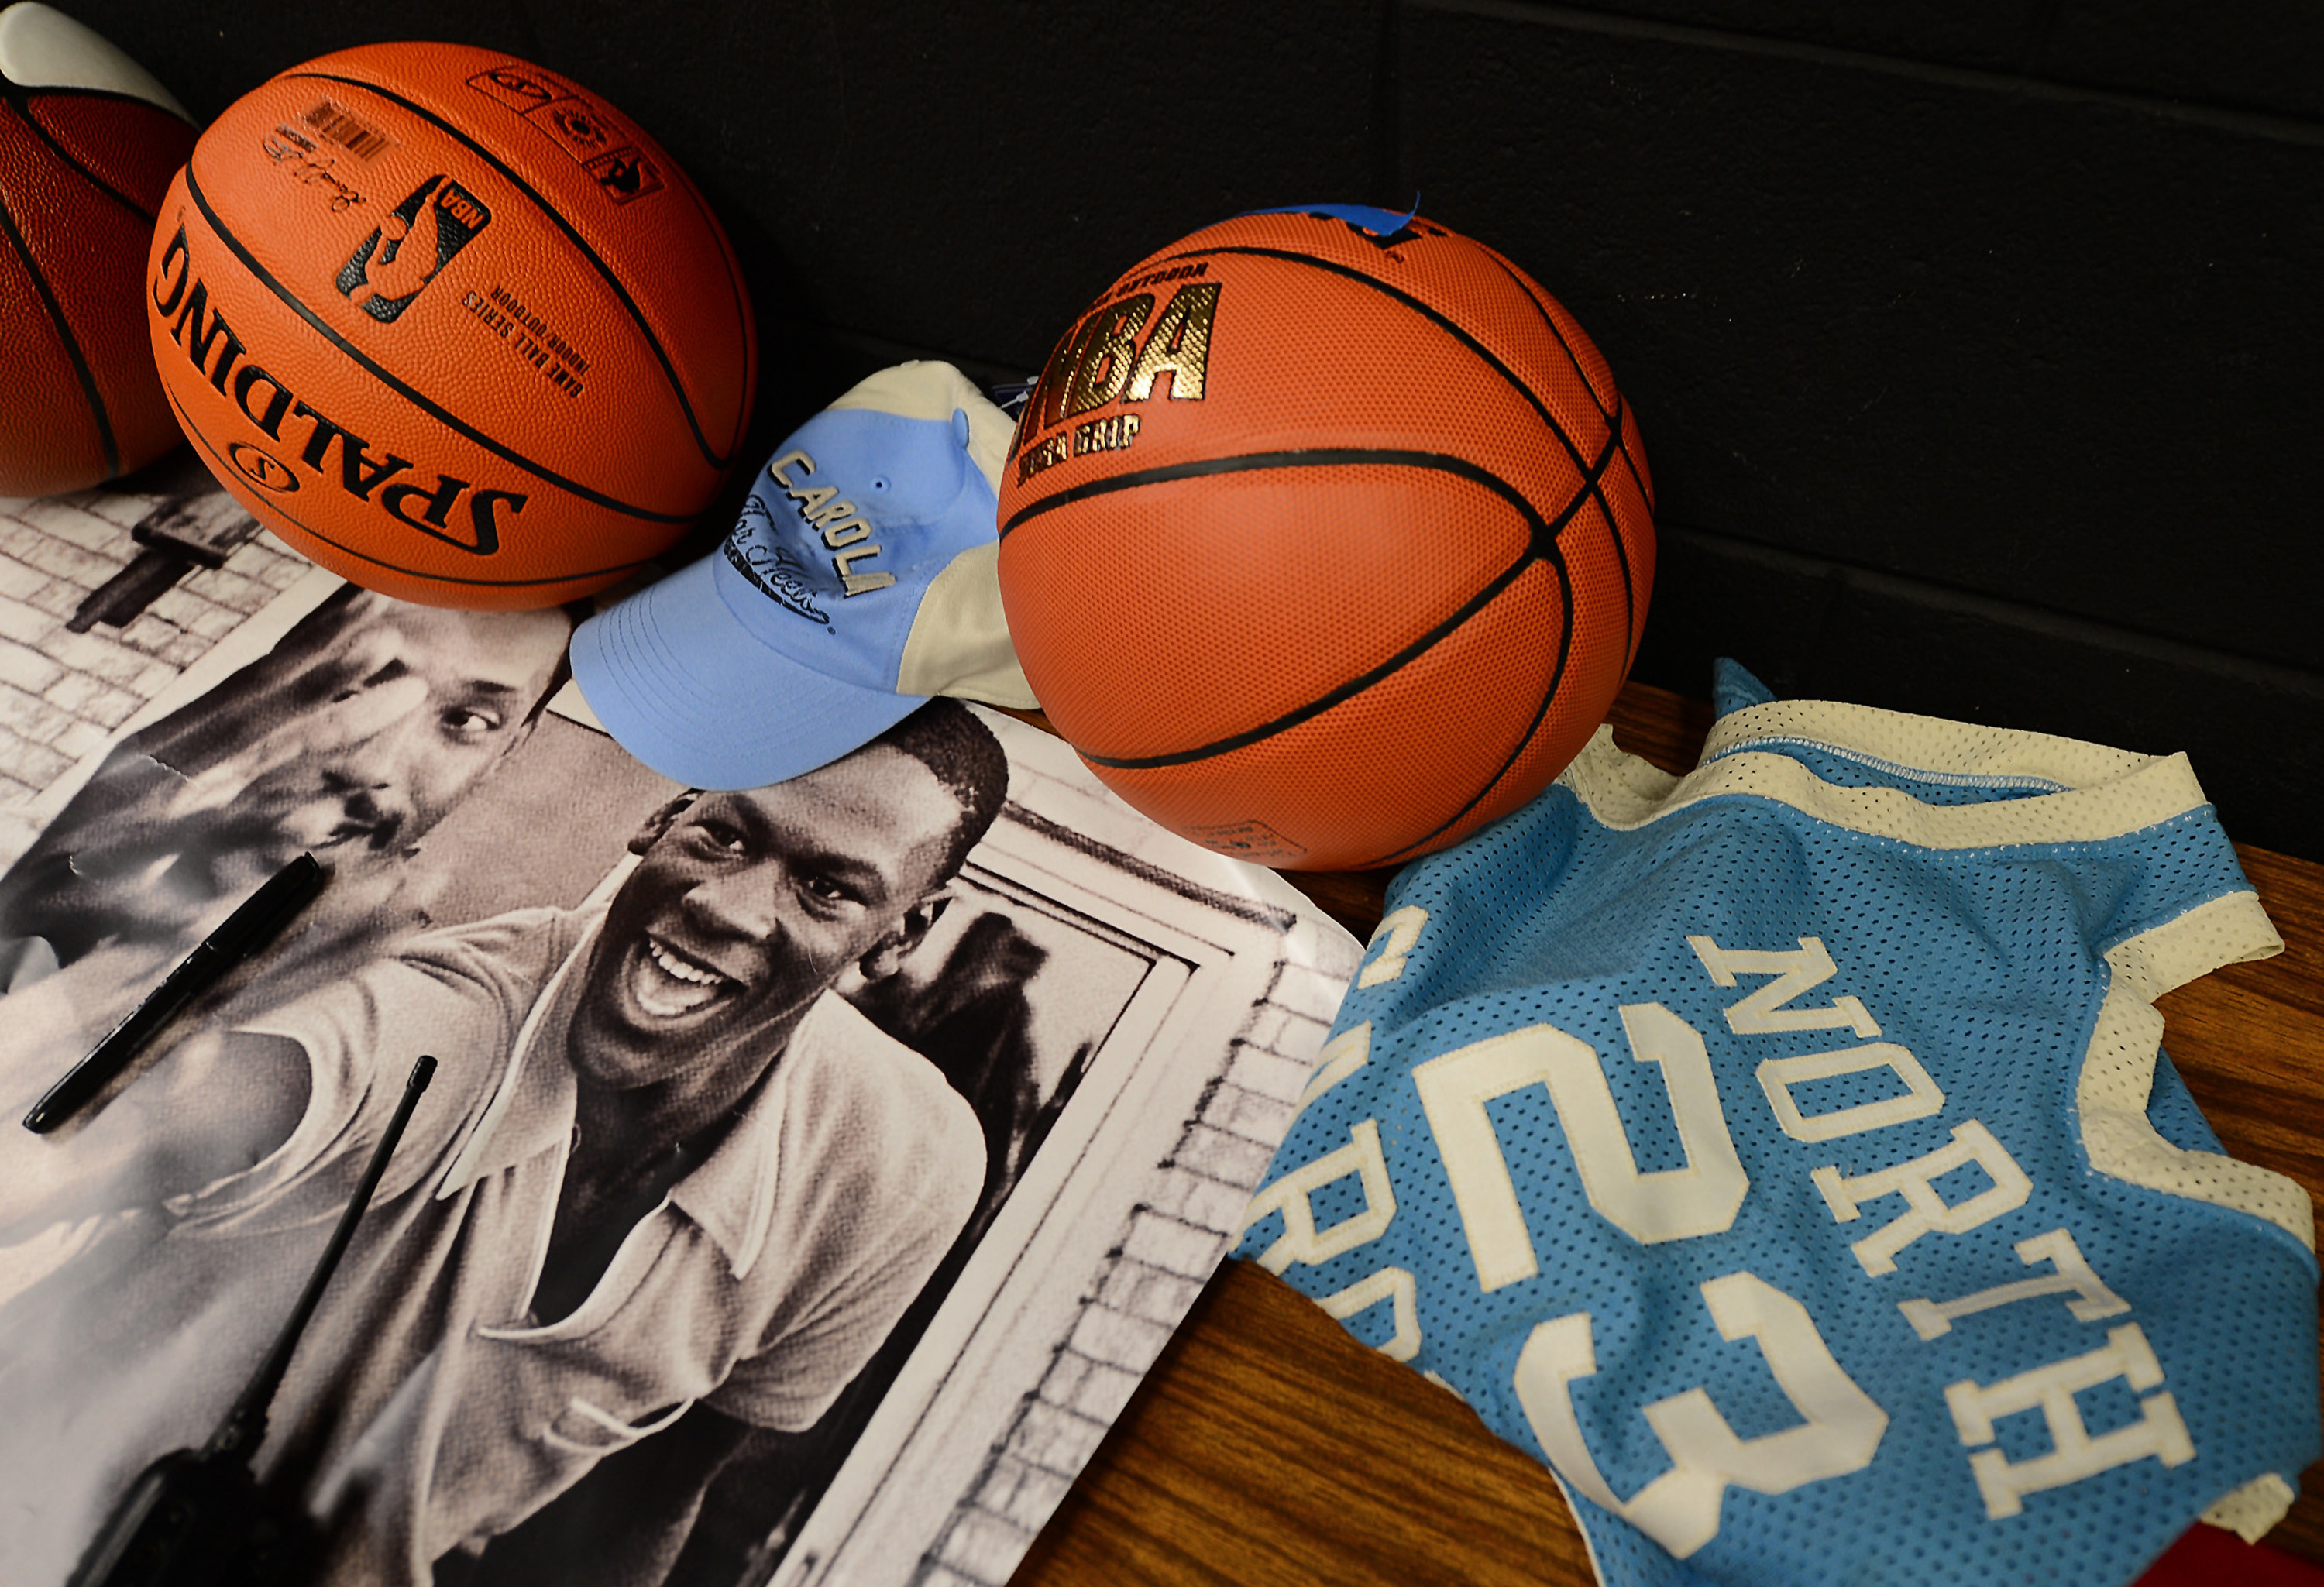 Michael Jordan items sit on a table backstage at Vance High School on Thursday, March 21, 2013. Bobcats Sports and Entertainment, along with FOX Sports Carolinas/Sports South announced a $200,000 donation to Y Achievers, a YMCA of Greater Charlotte program that operates in partnership with Charlotte-Mecklenburg Schools.